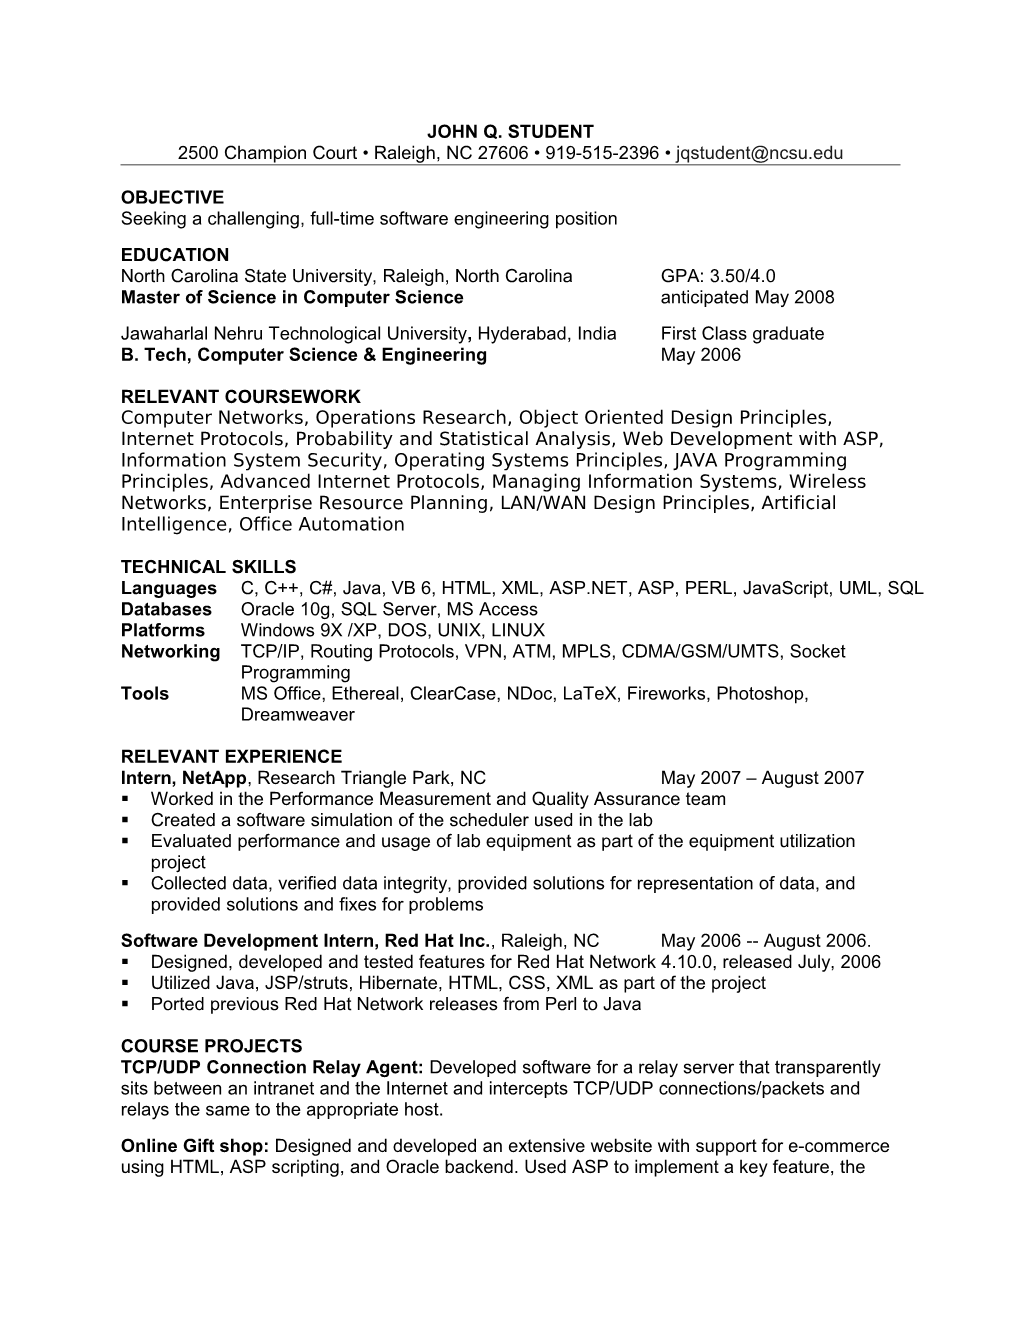 Seeking a Challenging, Full-Time Software Engineering Position